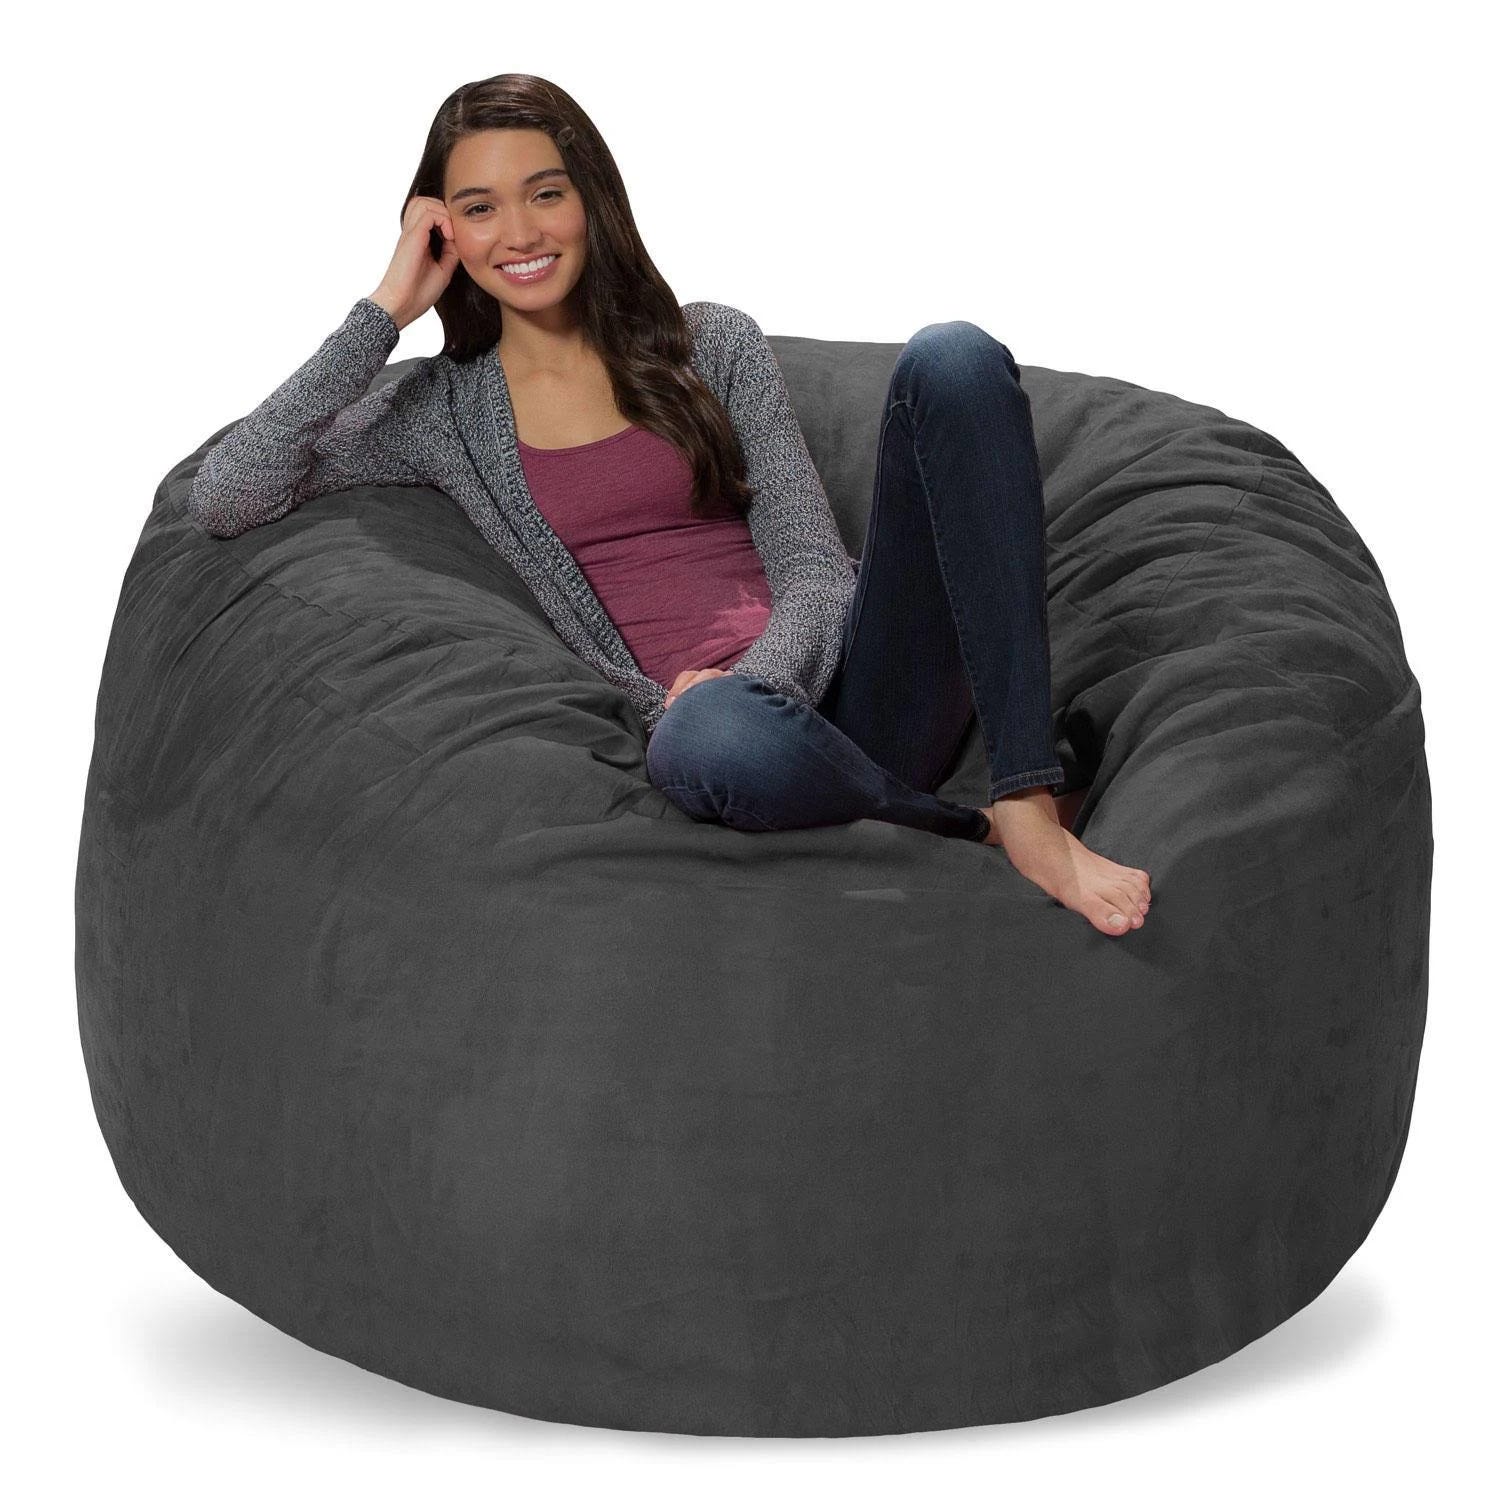 5ft Memory Foam Bean Bag Chair for Comfort and Style | Image